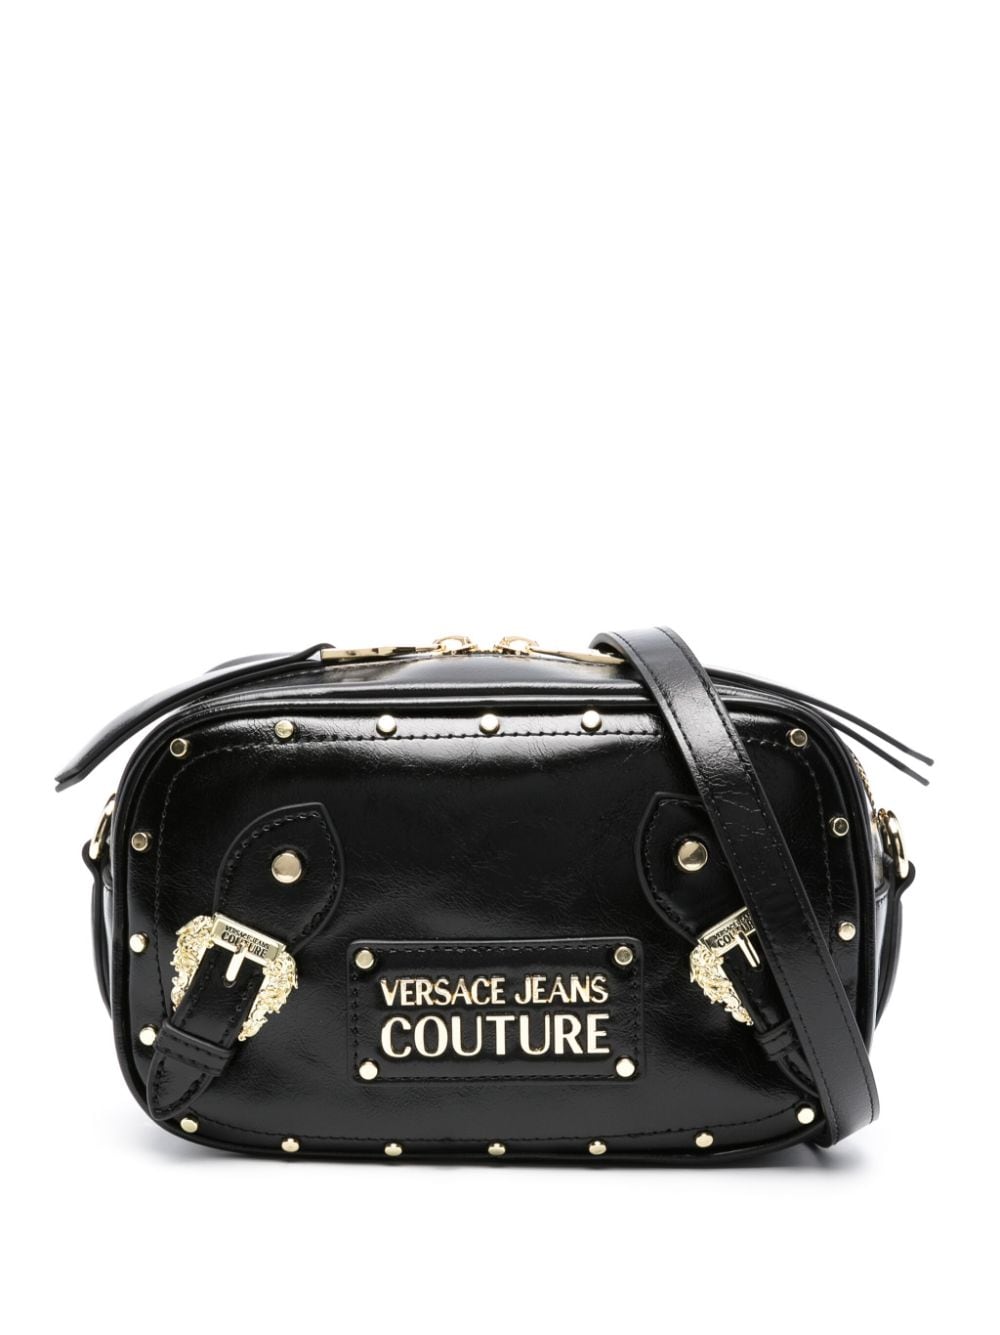 Versace Jeans Couture logo-lettering crossbody bag - Black von Versace Jeans Couture